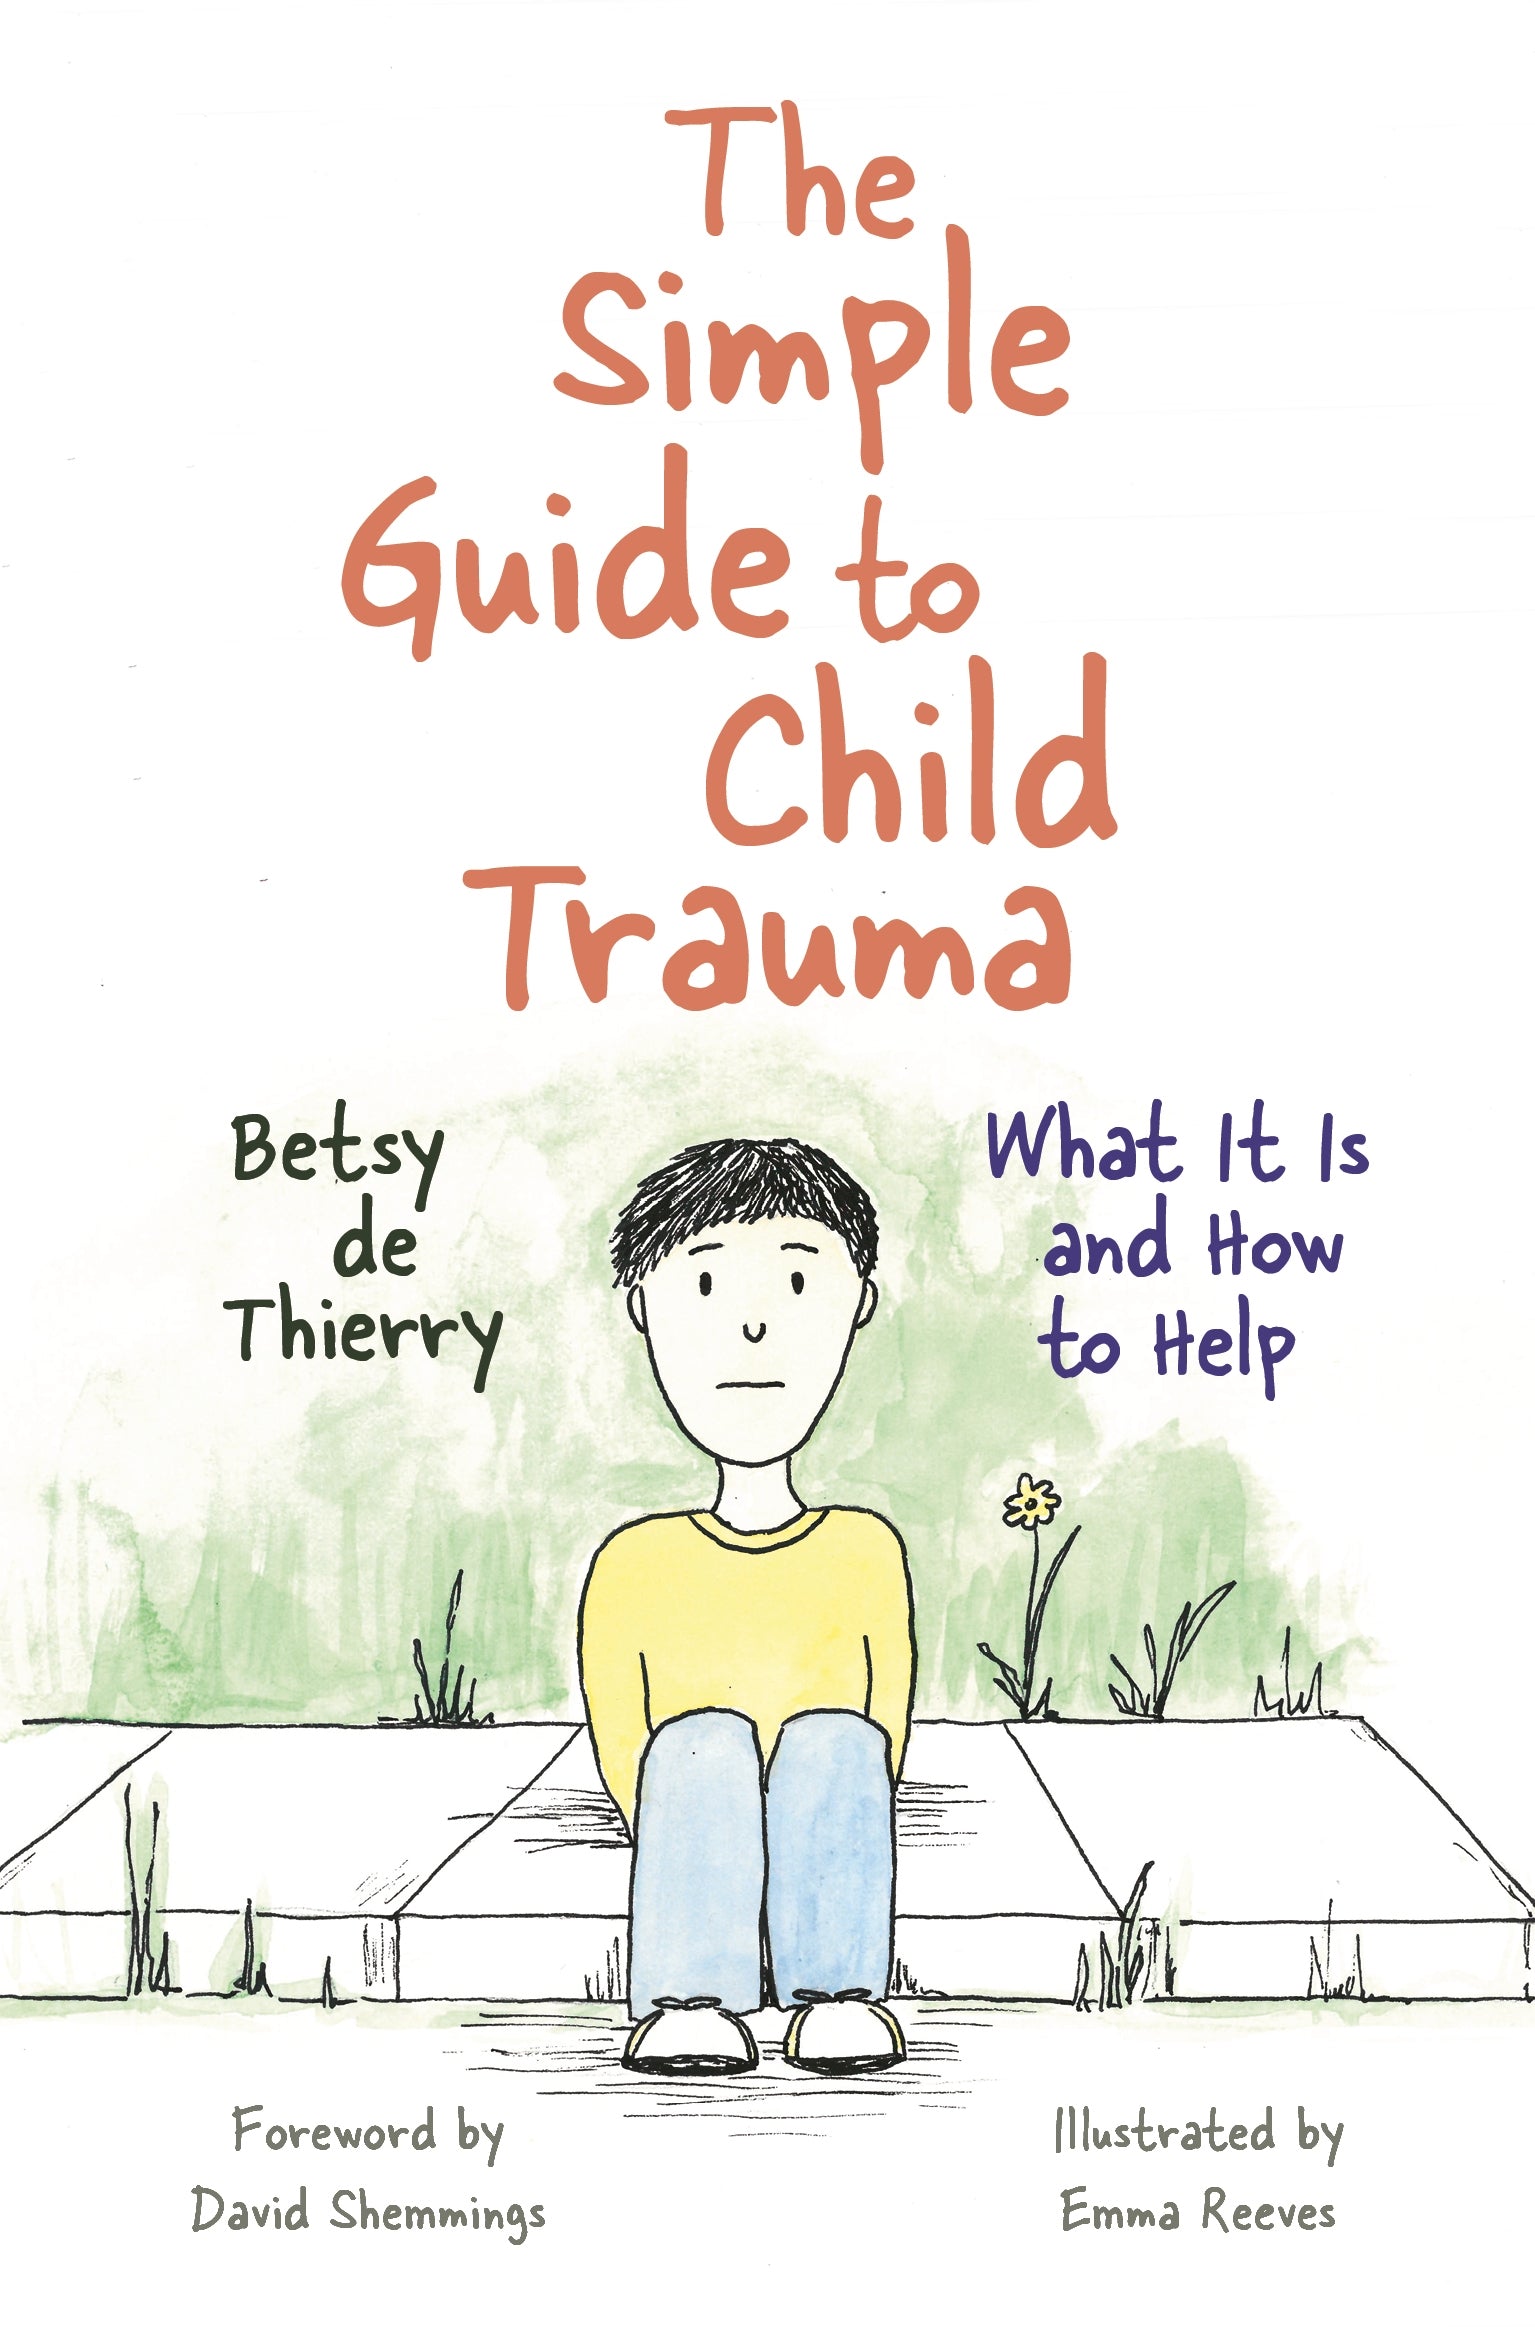 The Simple Guide to Child Trauma by Betsy de Thierry, Emma Reeves, David Shemmings